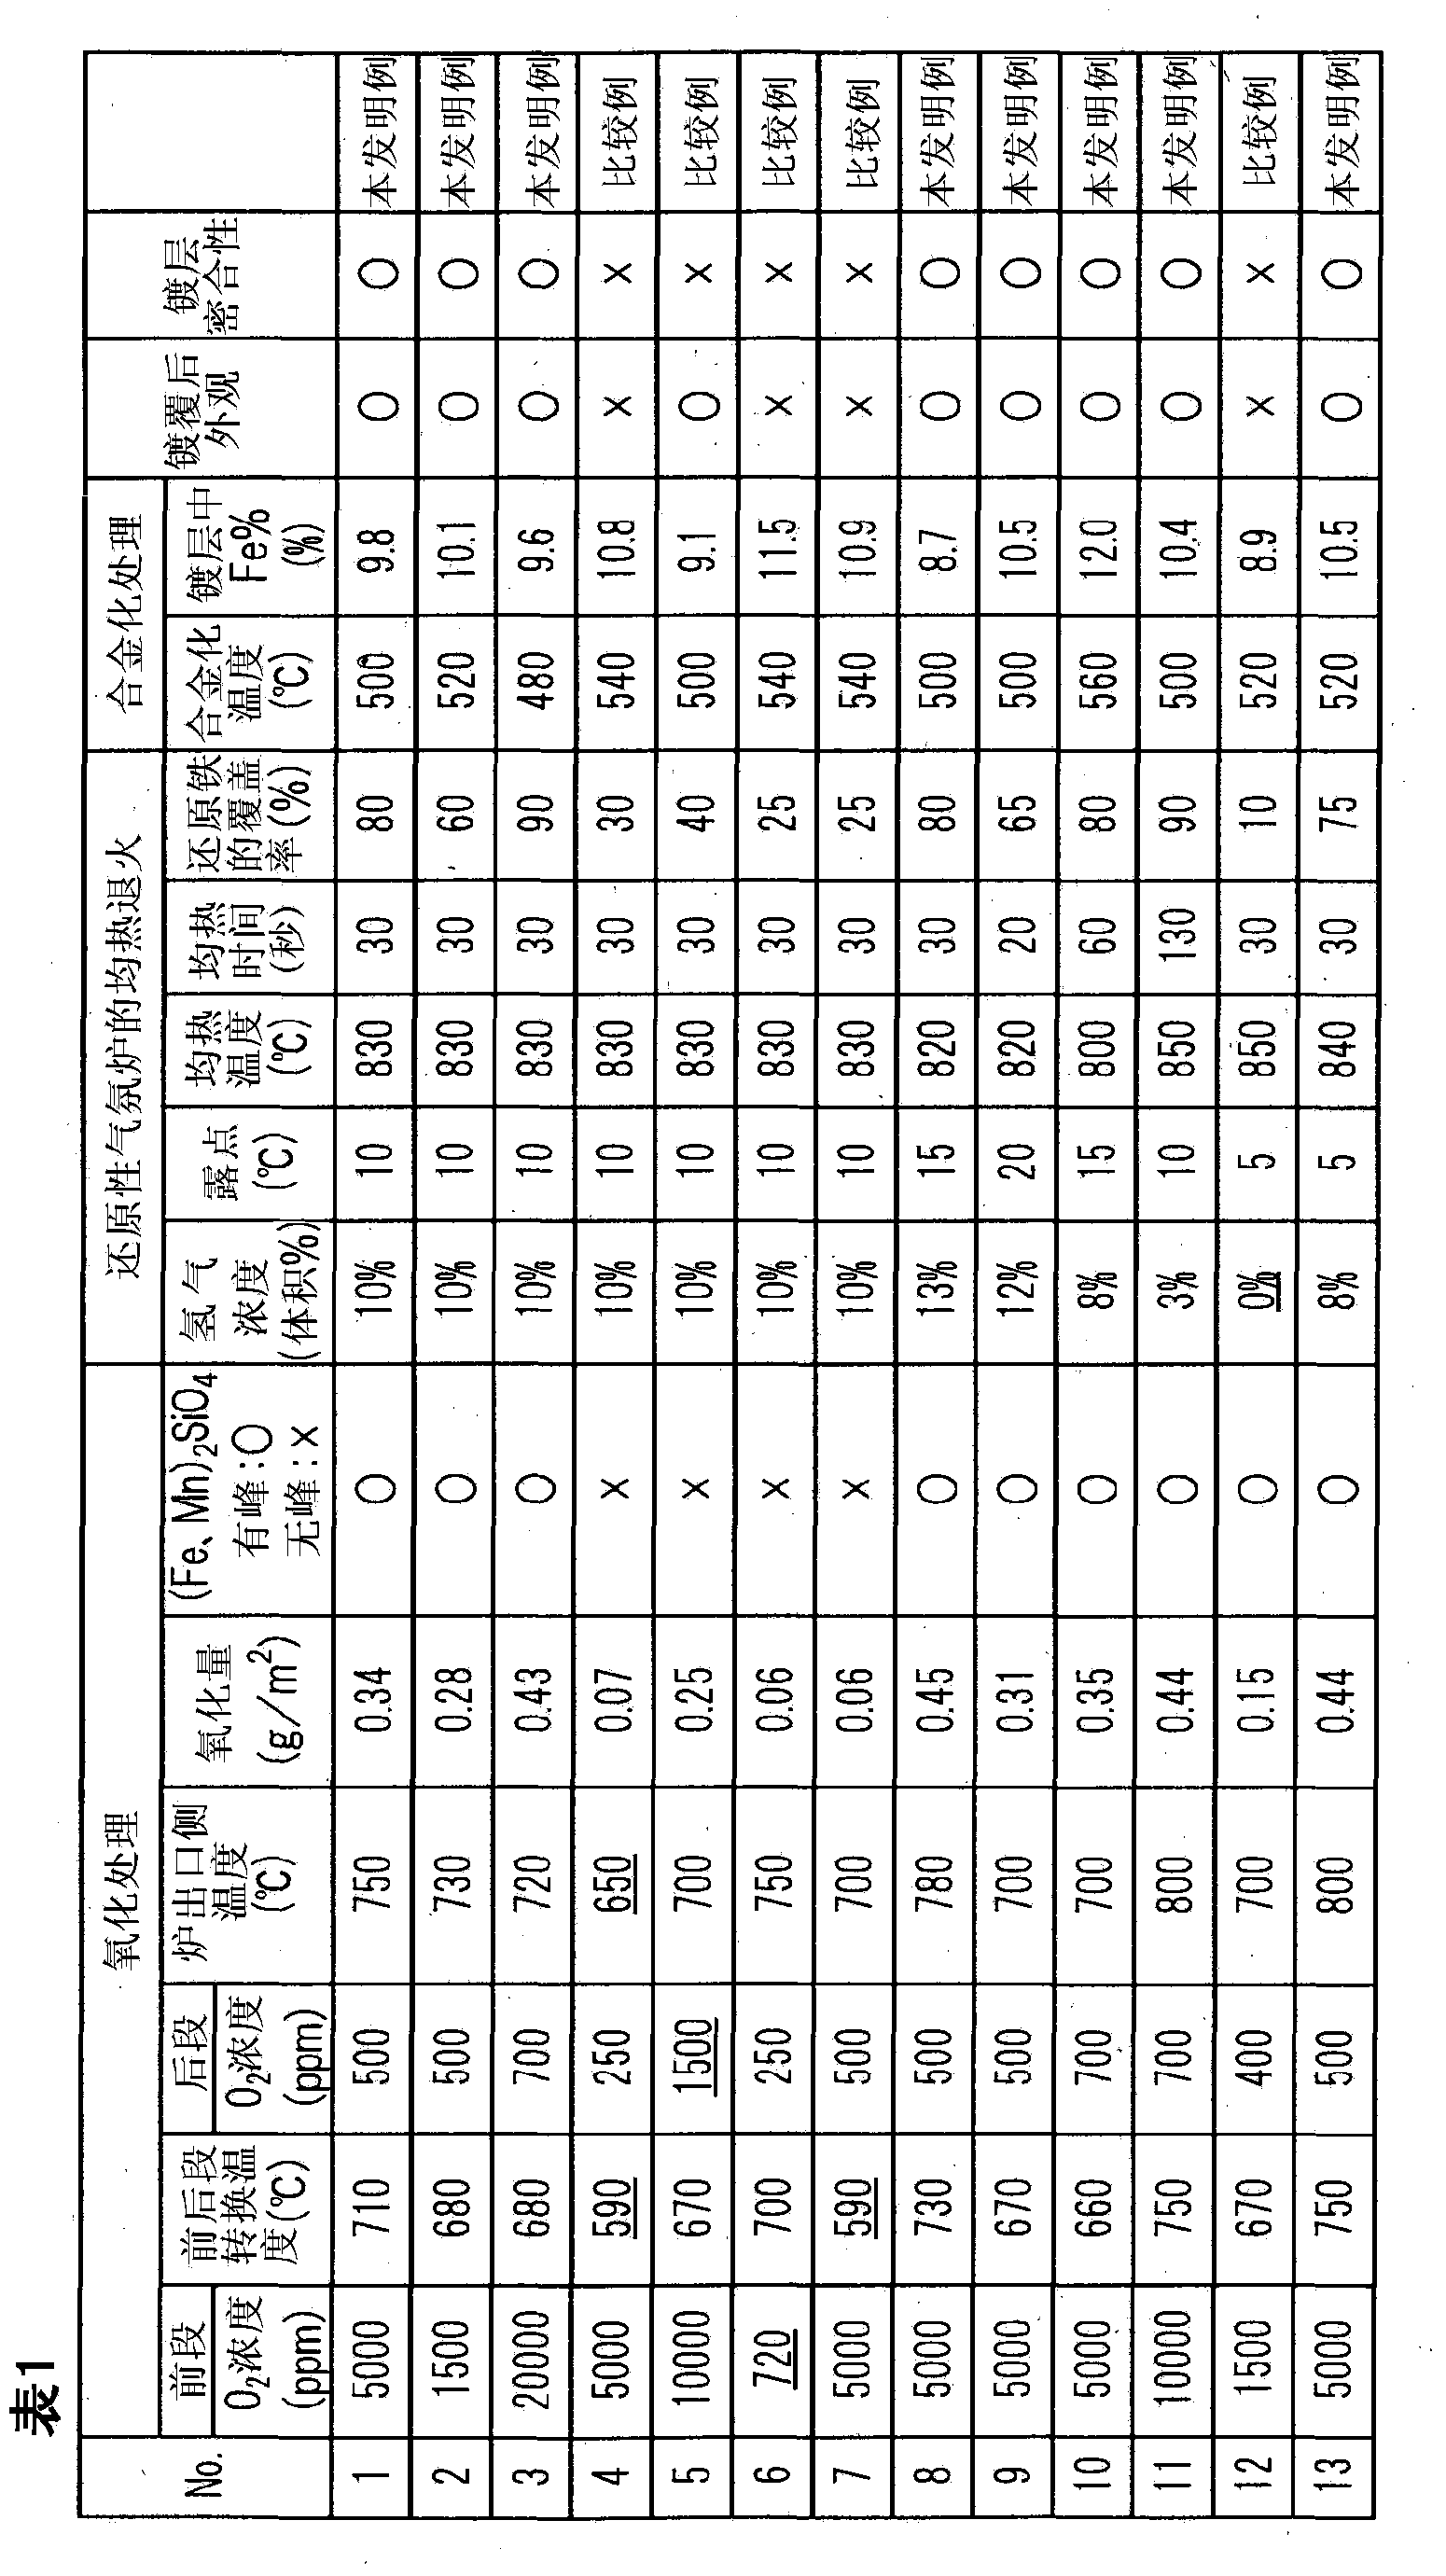 Method for producing alloyed hot-dip galvanized steel sheet having excellent adhesion to plating and excellent sliding properties